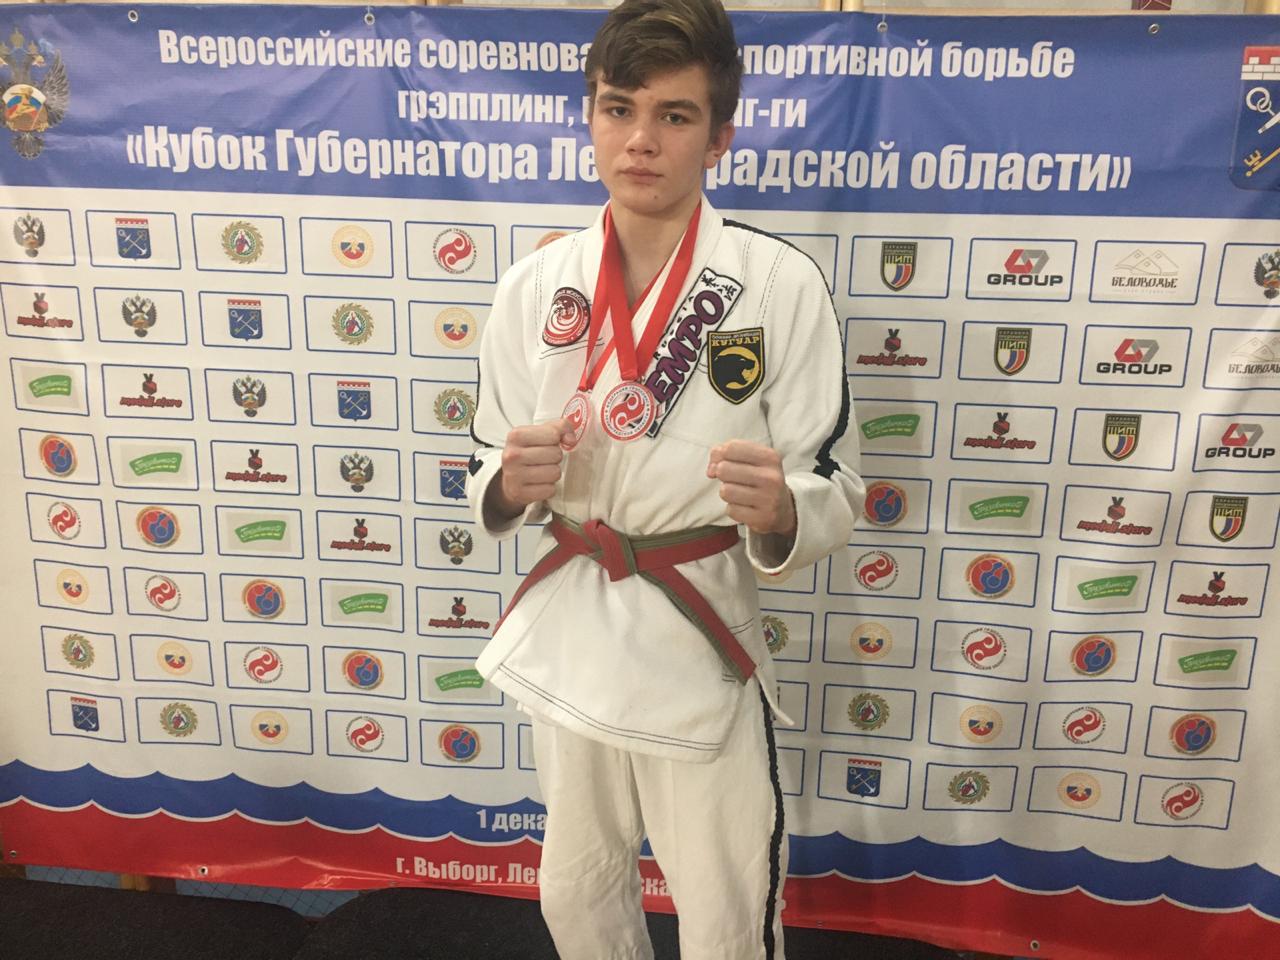 We help educate champions! December 1, 2019, All-Russian competitions in grappling, Leningrad region, Vyborg